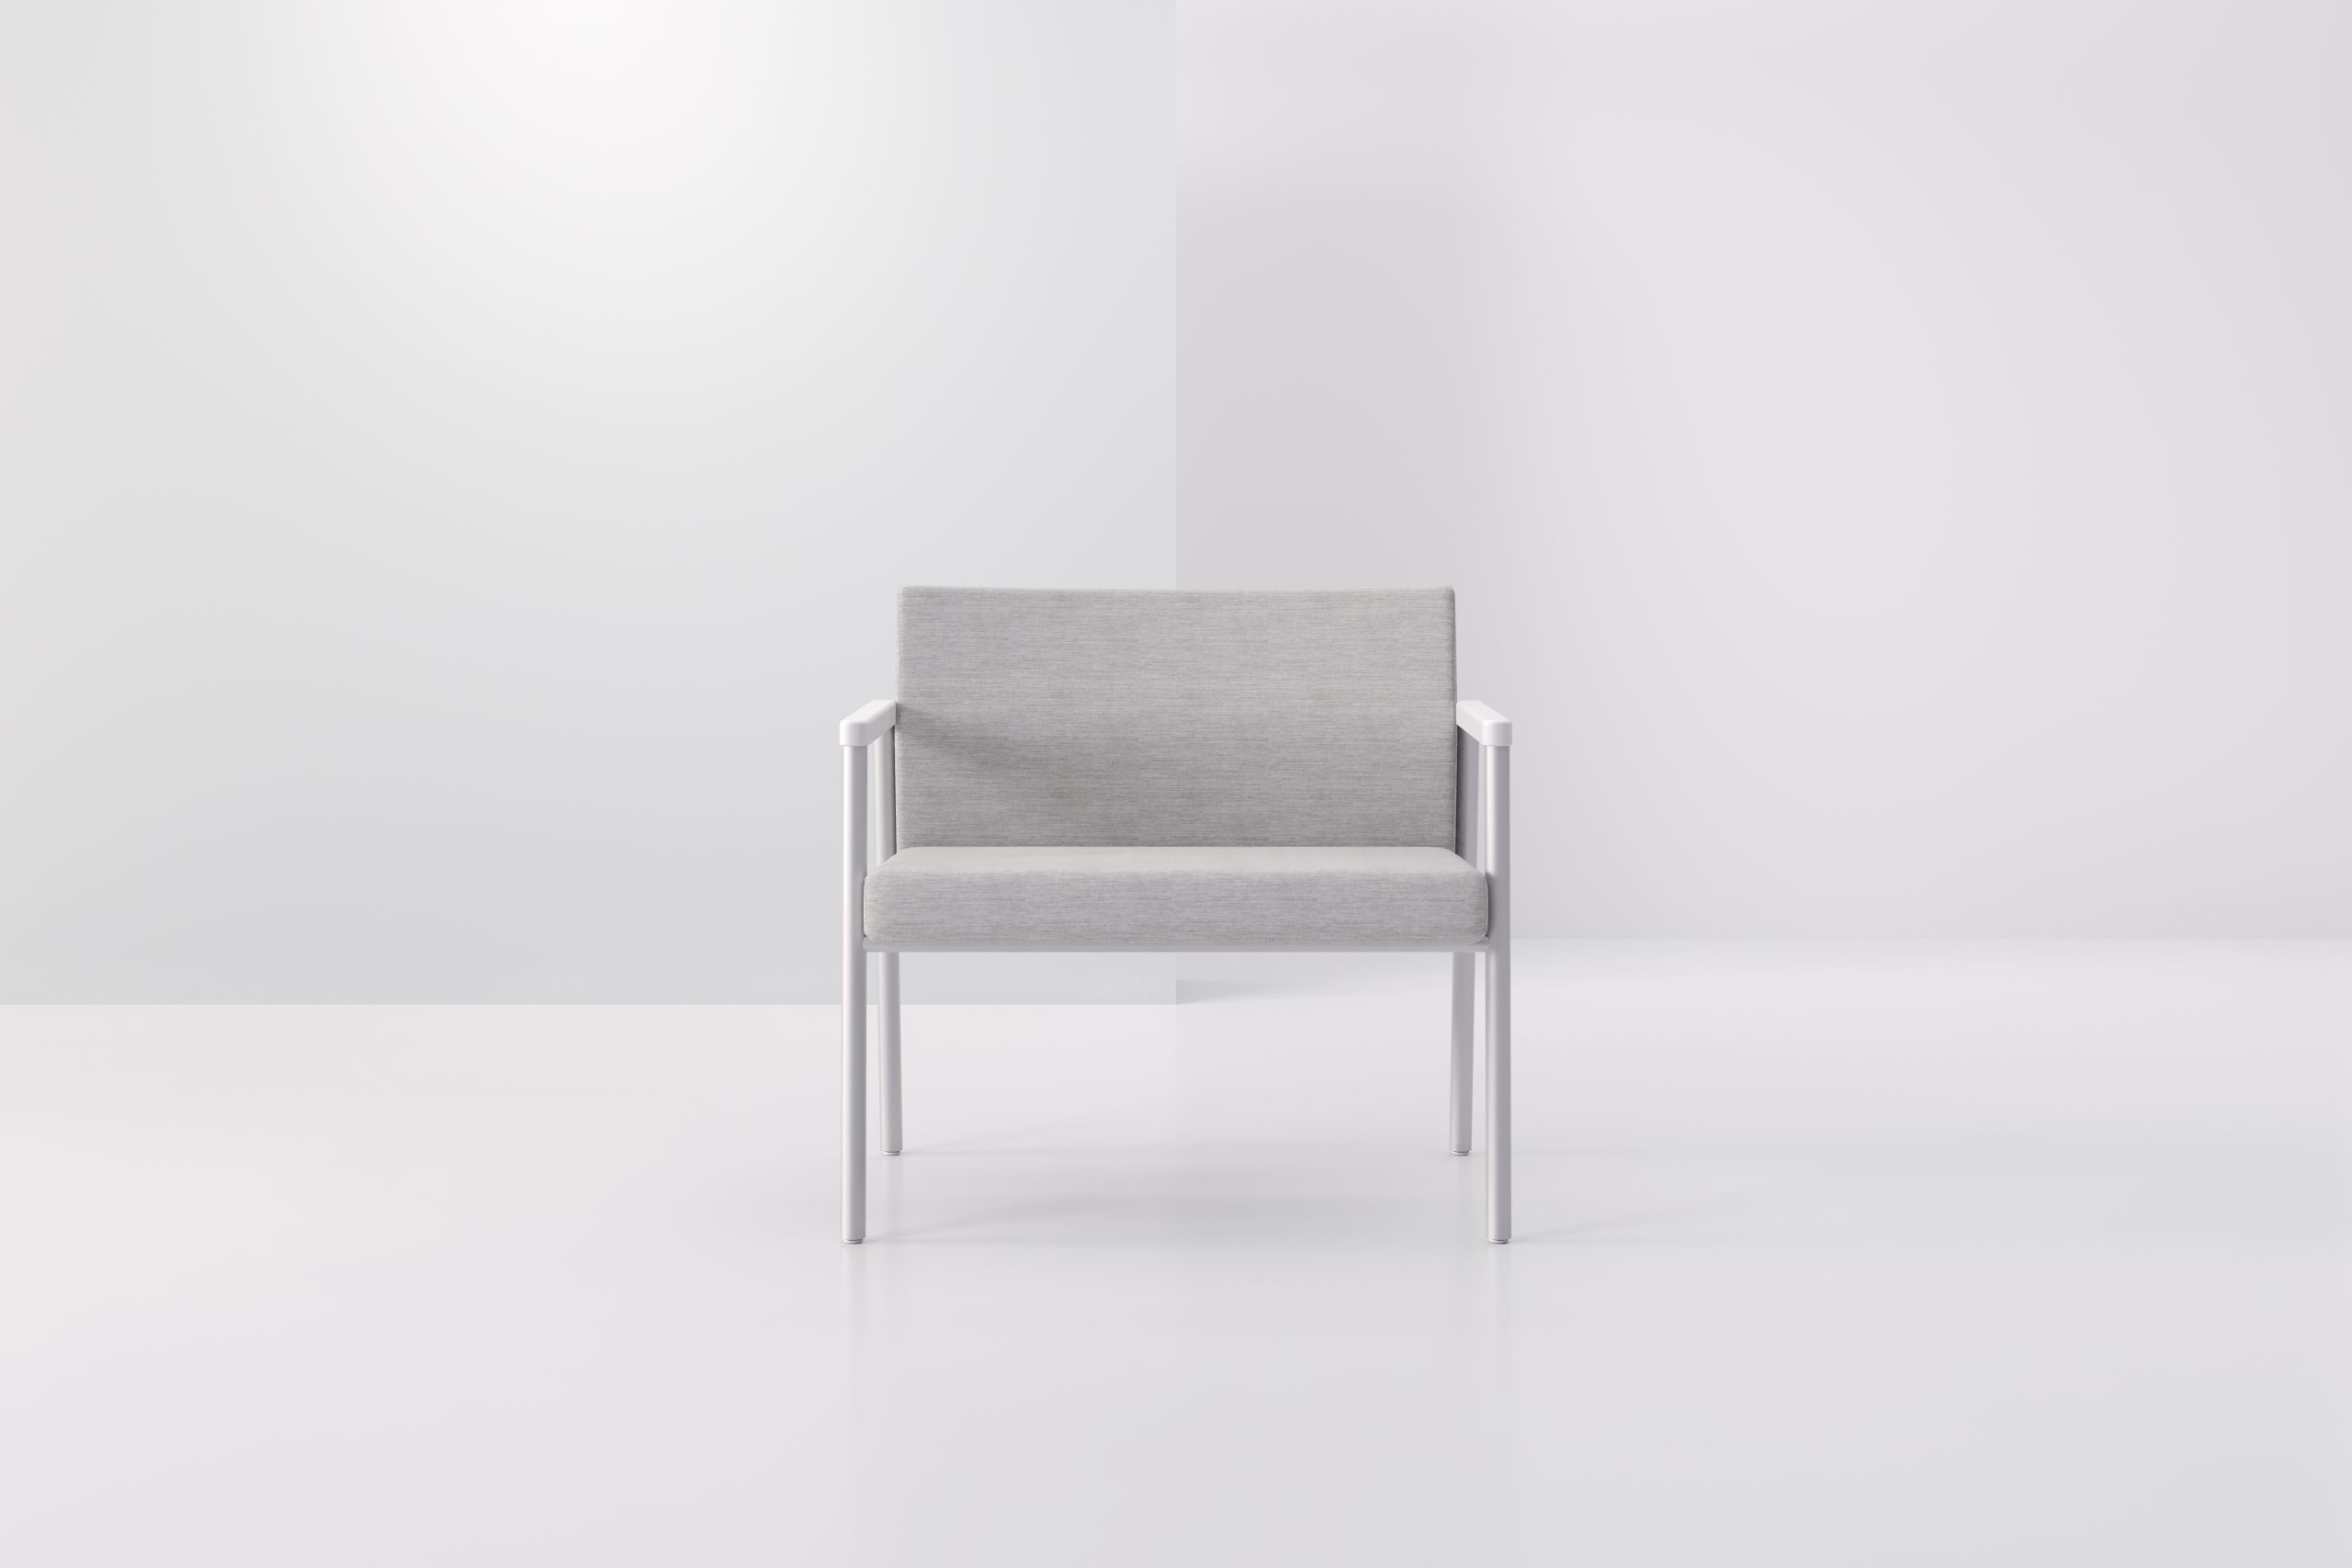 Altos 30 Chair Product Image 2